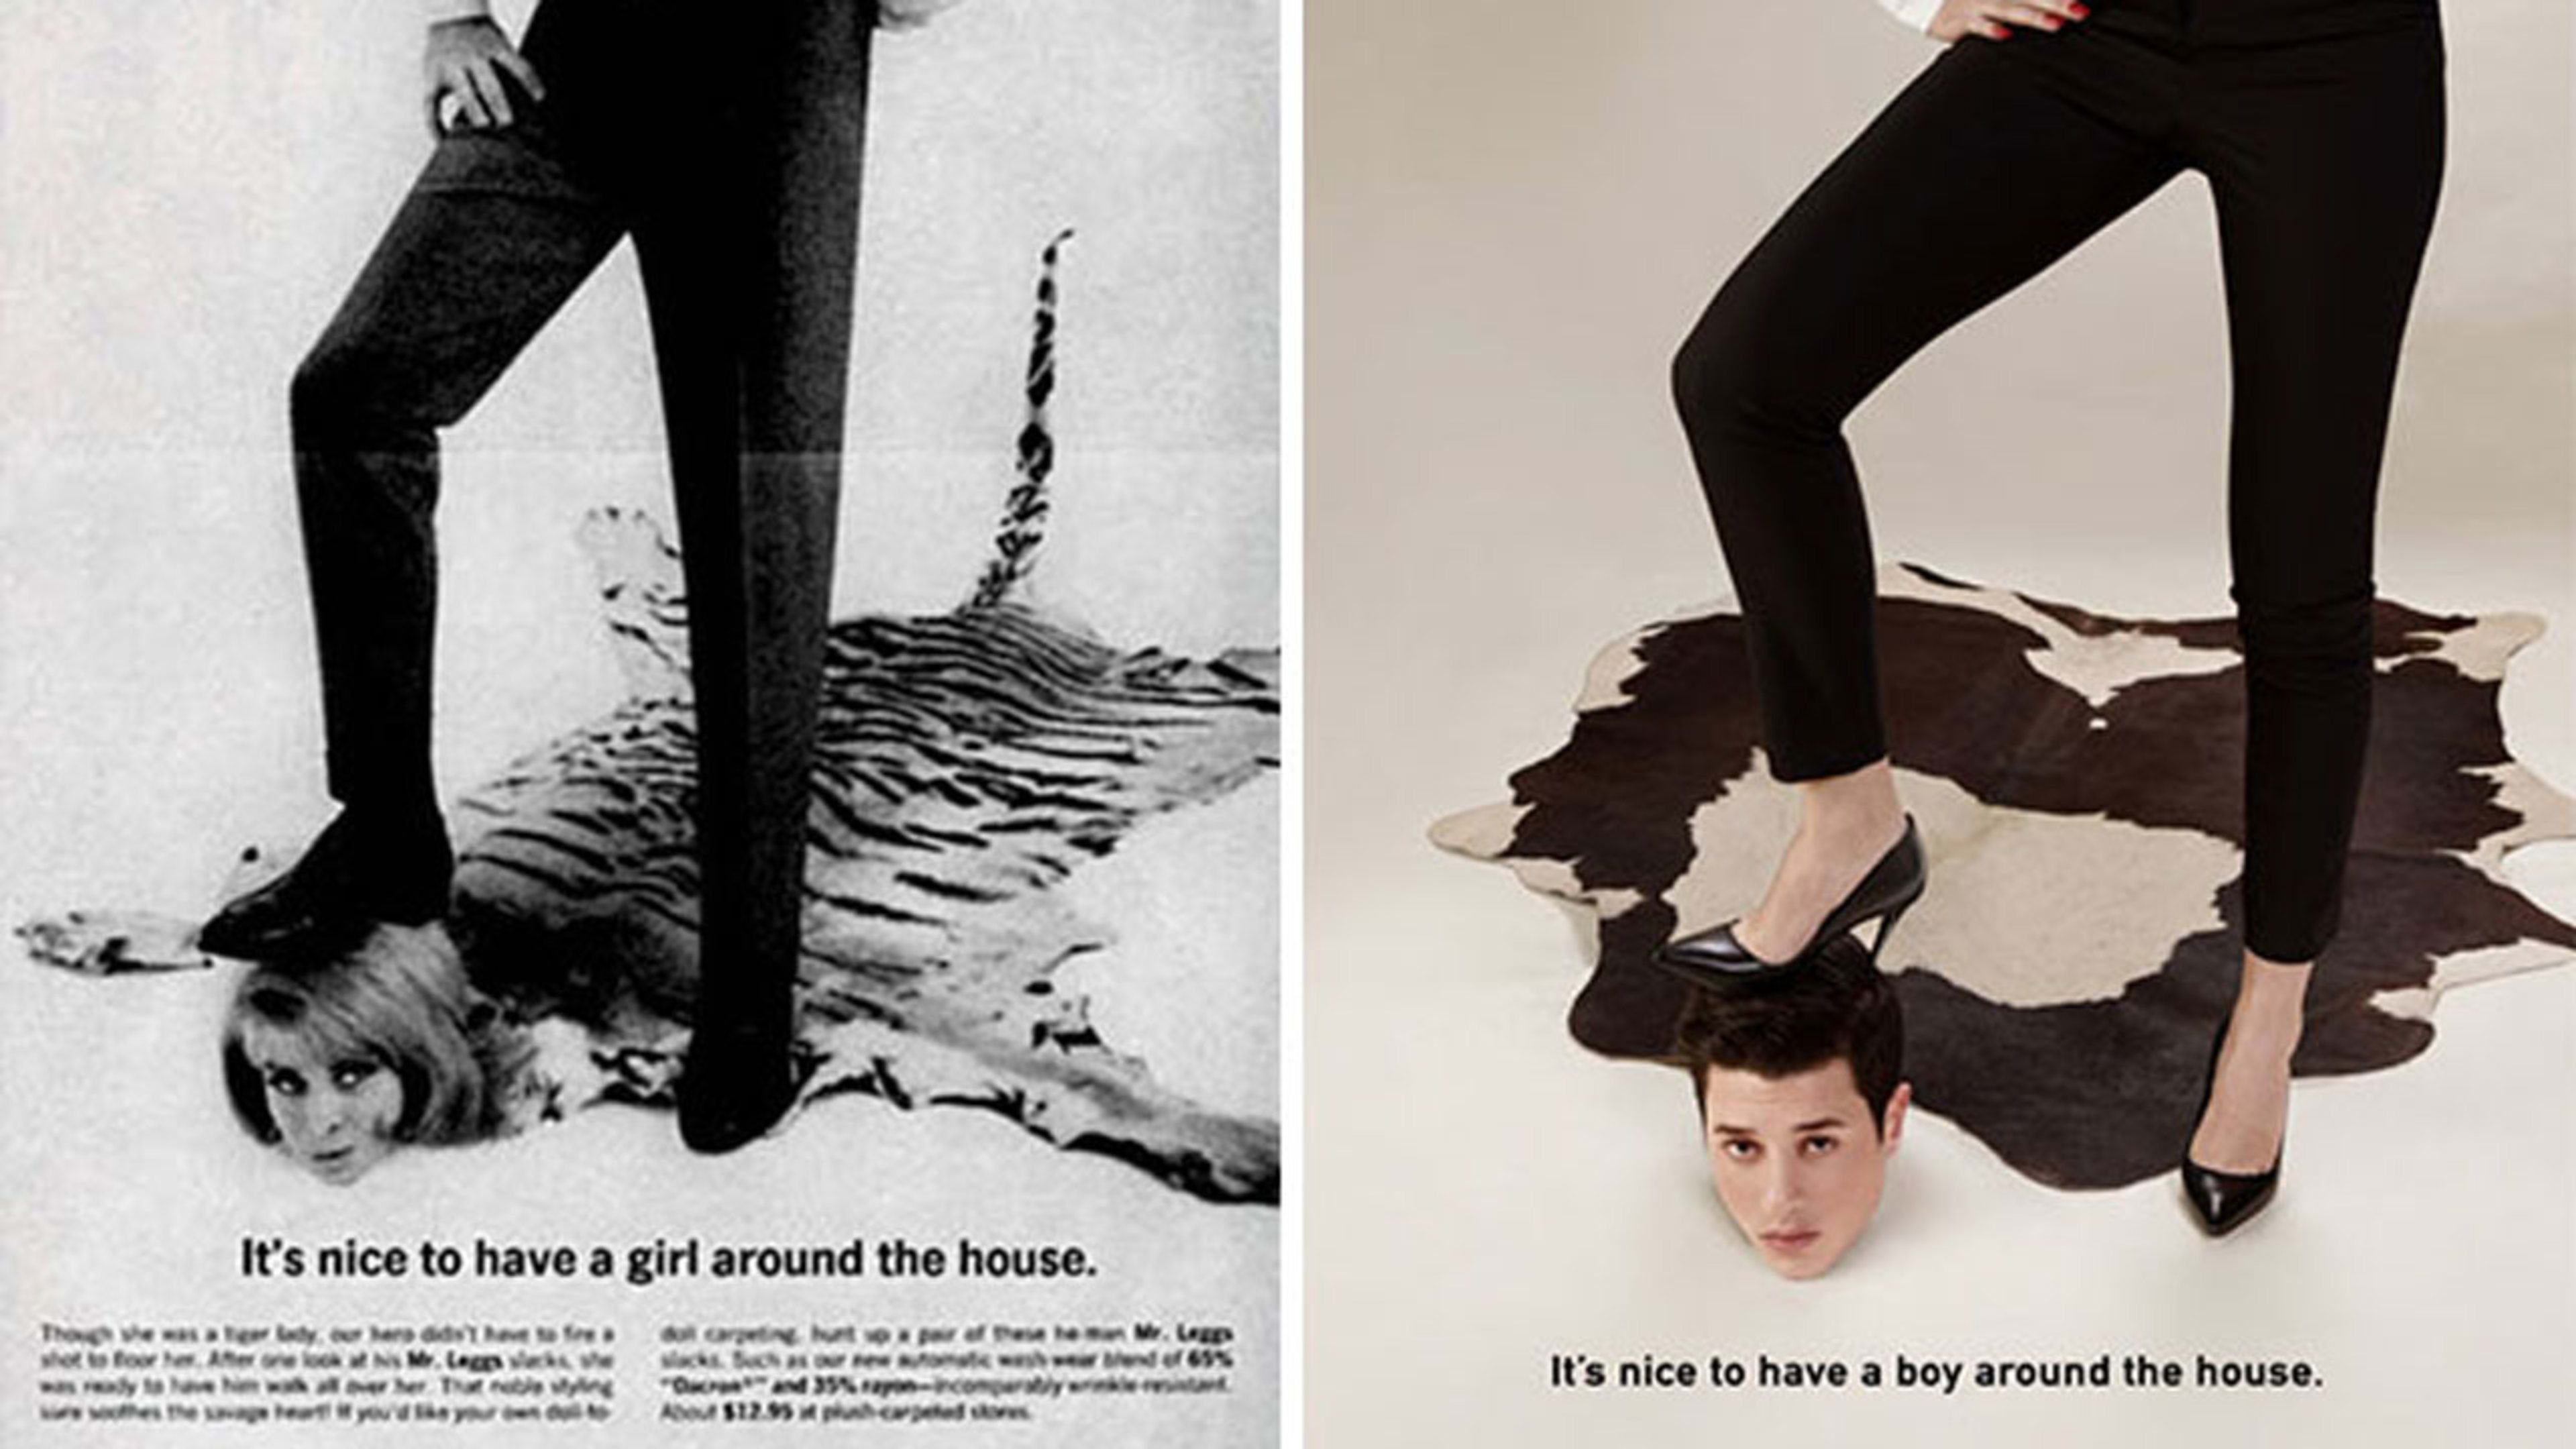 This Photographer Flips Gender Roles In Sexist “Mad Men” Era Ads